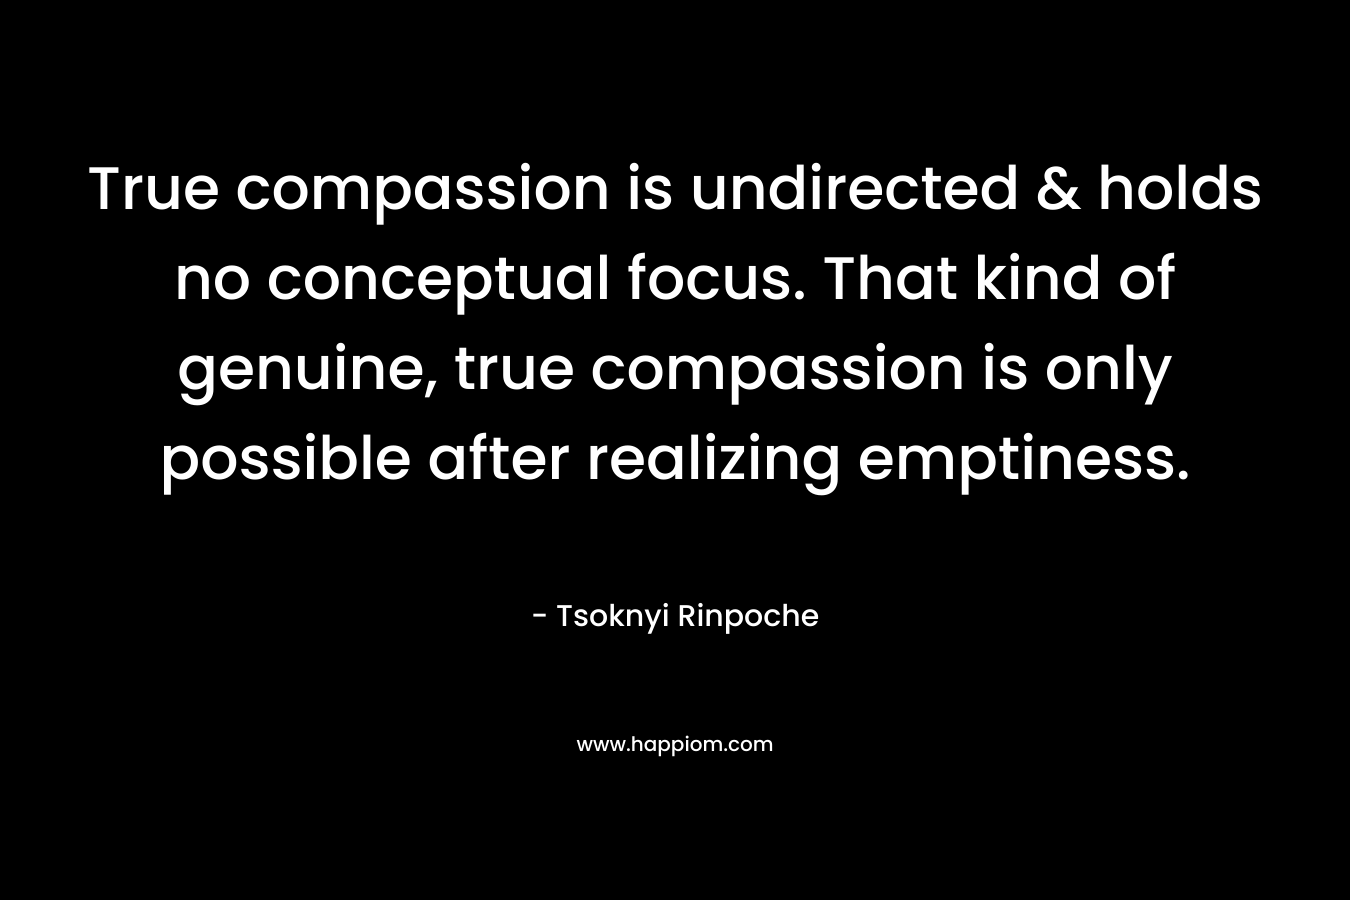 True compassion is undirected & holds no conceptual focus. That kind of genuine, true compassion is only possible after realizing emptiness. – Tsoknyi Rinpoche